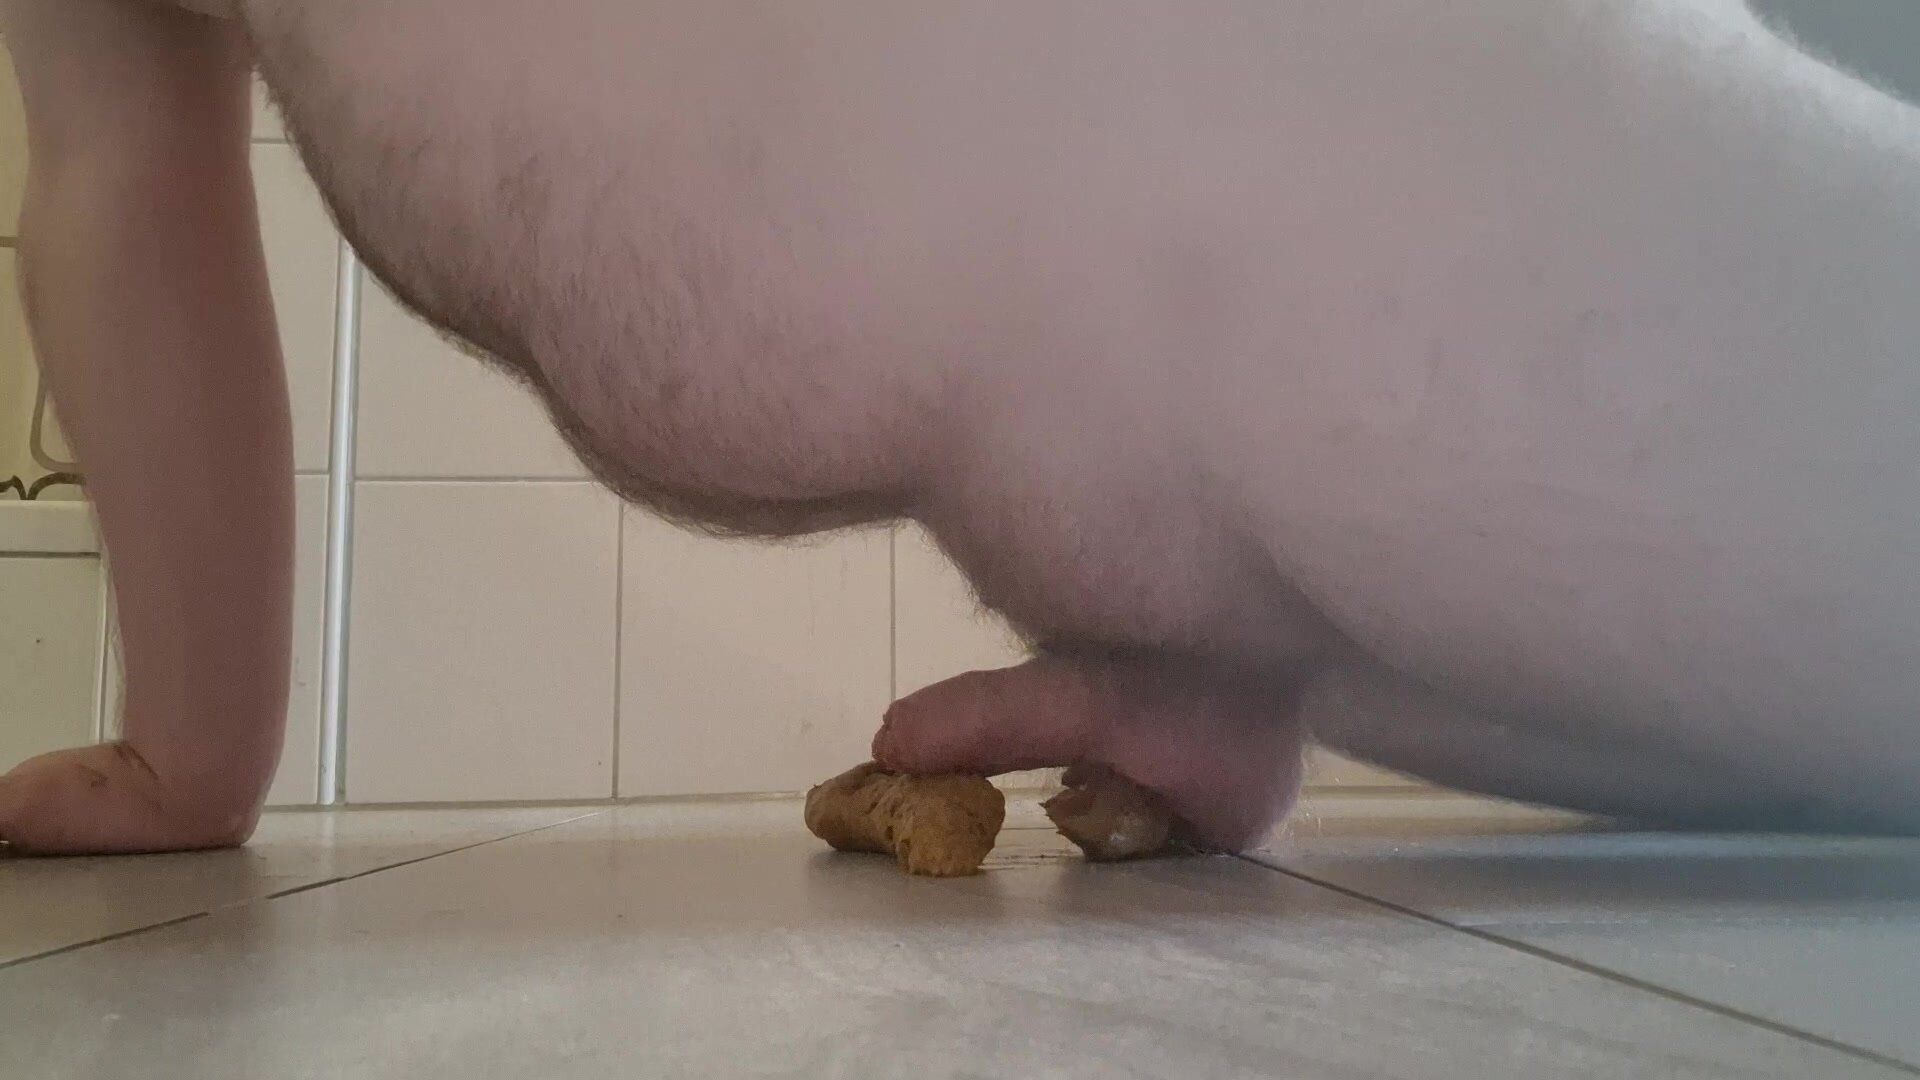 I had to feel this poop with my cock